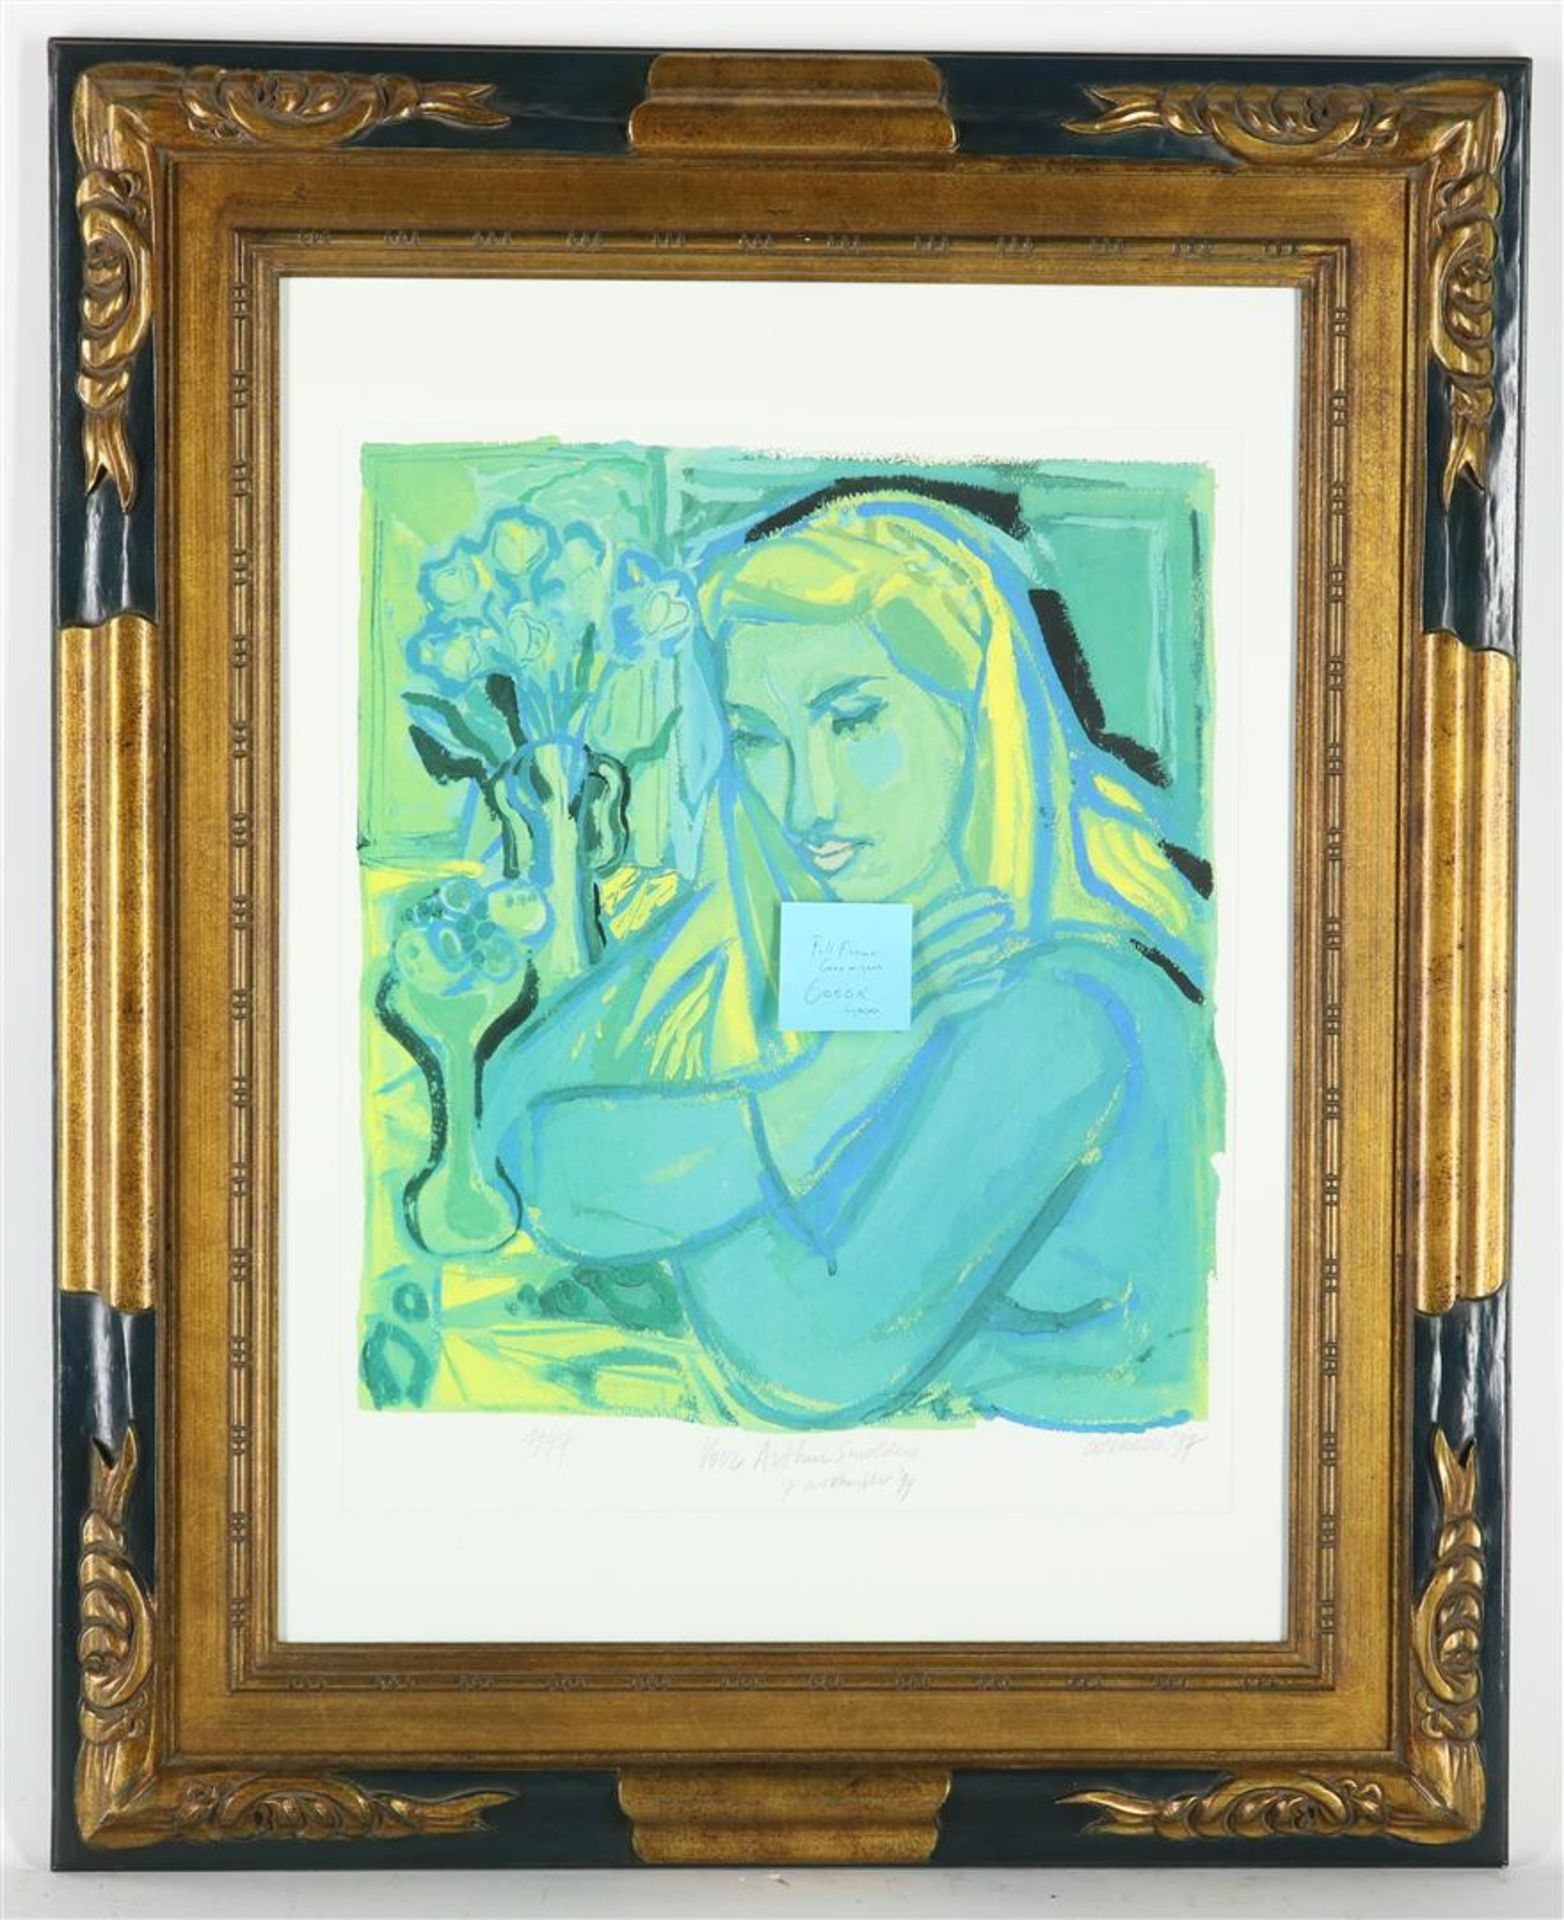 Corneille (Cornelis Guillaume van Beverloo) (1922-2010) Liesje, signed lower right and dated '97, - Image 16 of 17